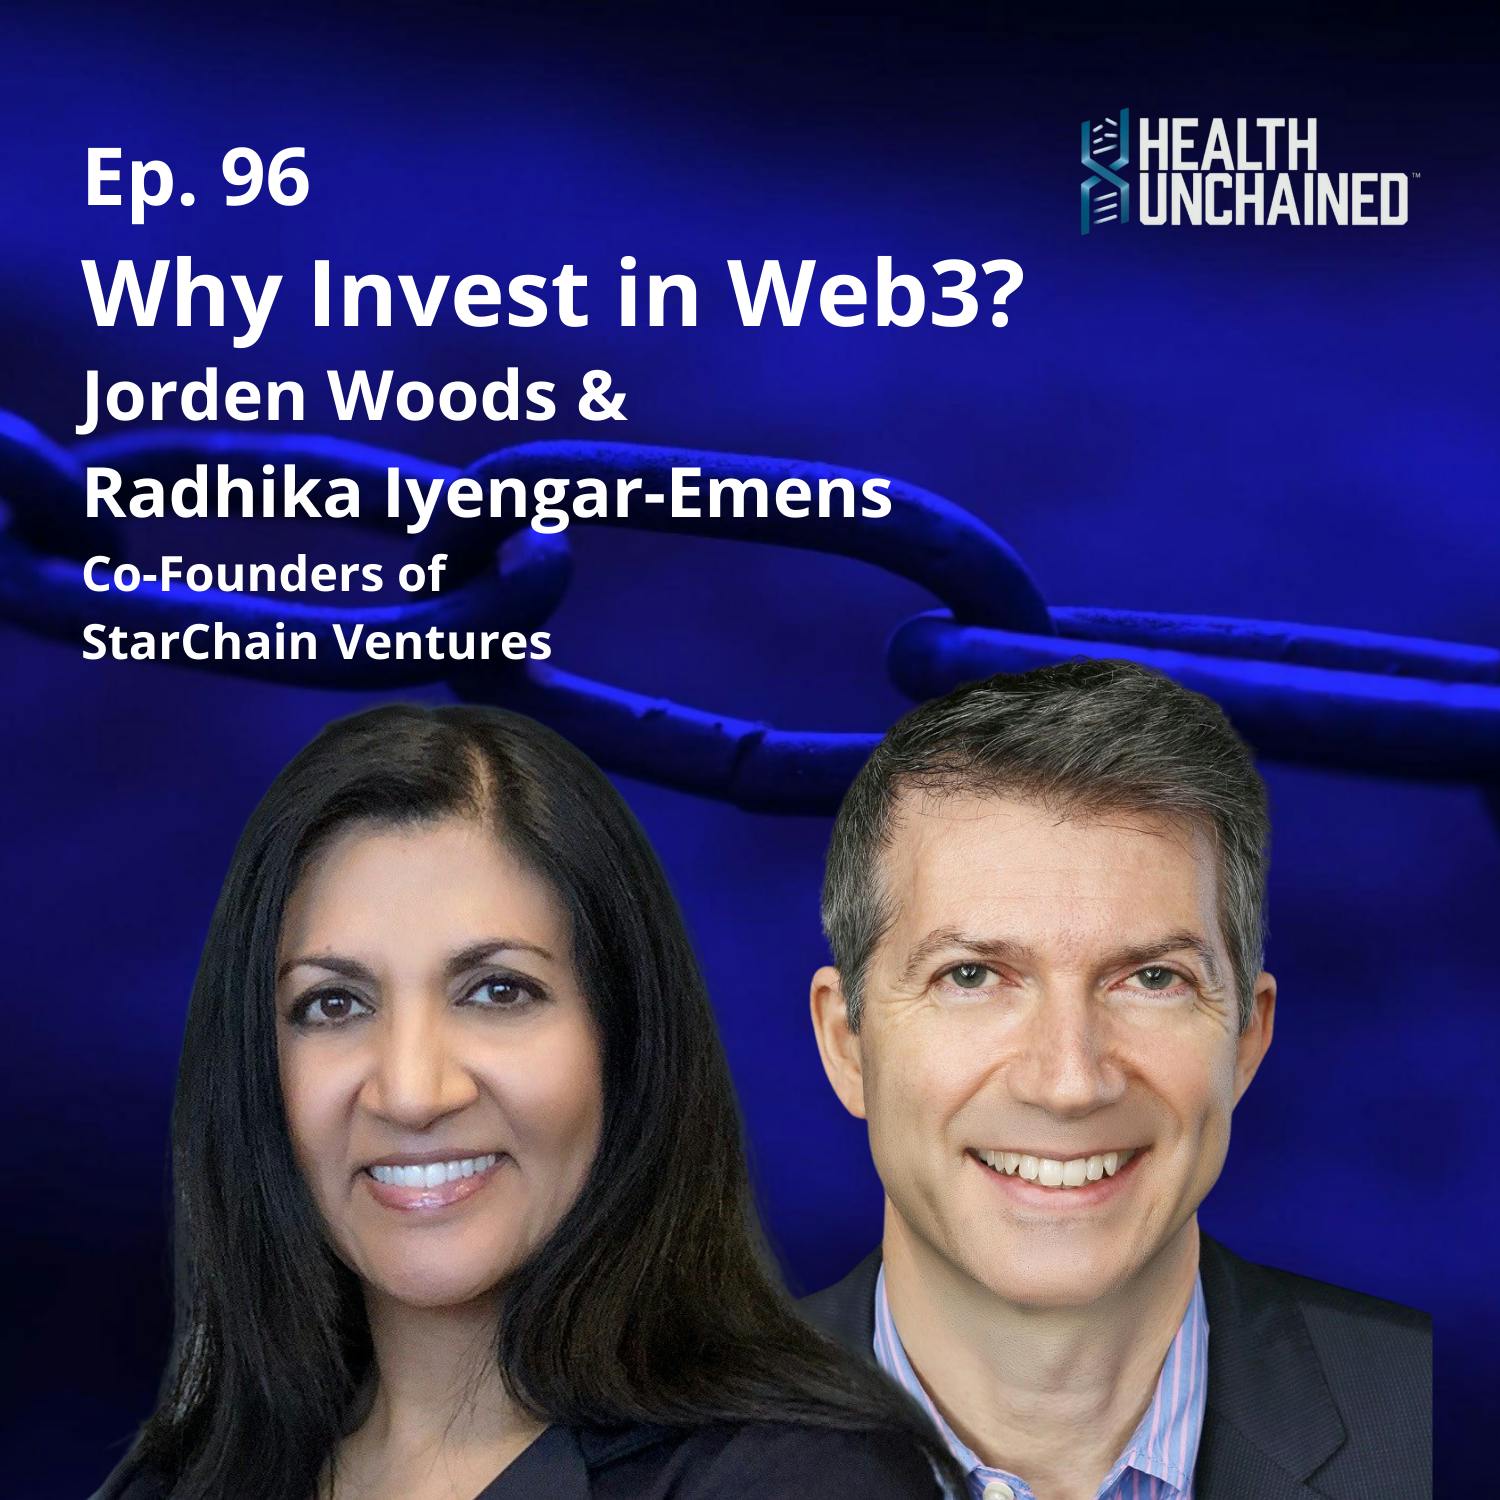 Ep. 96: Why Invest in Web3? – Jorden Woods & Radhika Iyengar (Co-founders of StarChain Ventures)